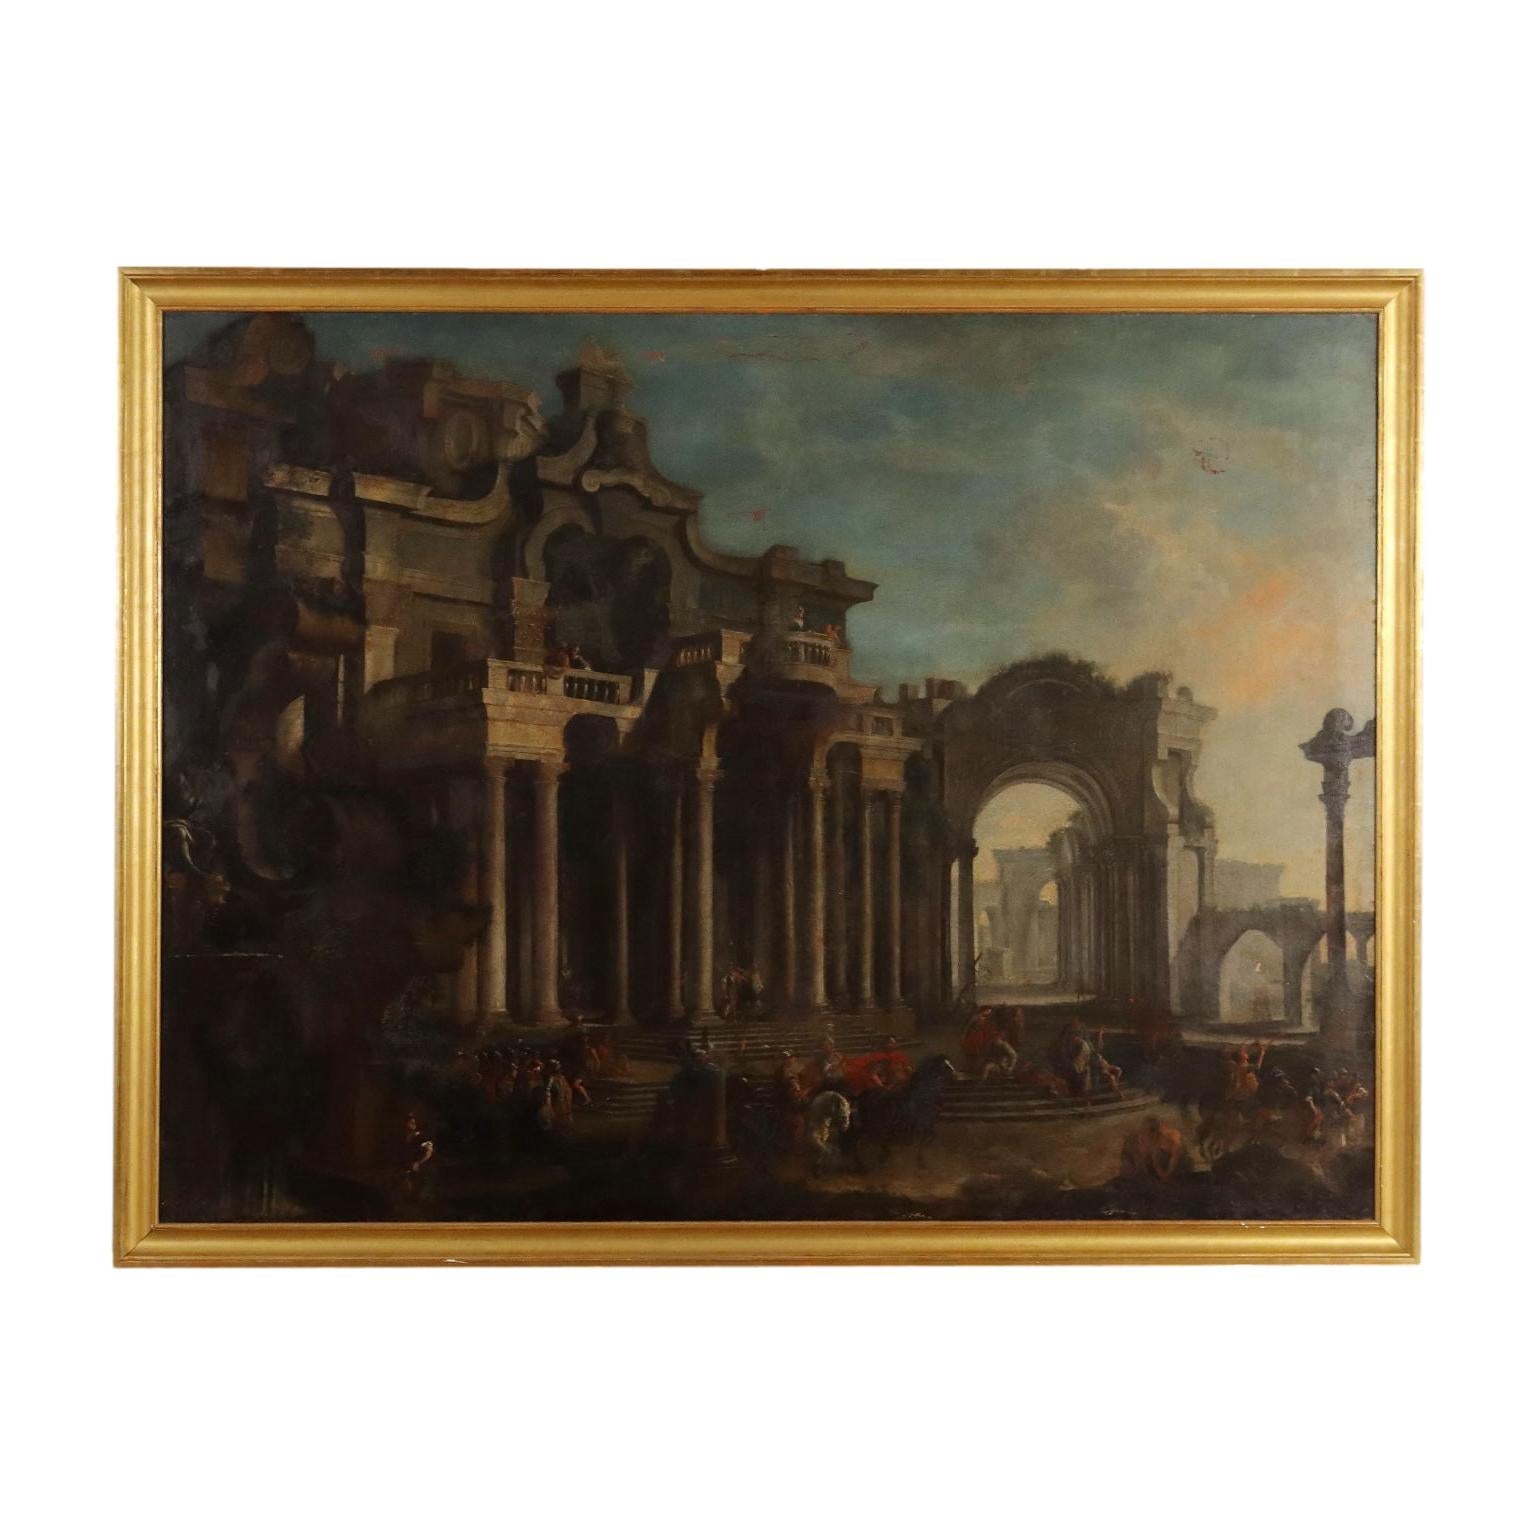 Unknown Landscape Painting - Architectural Capriccio with Figures,  XVIIIth century